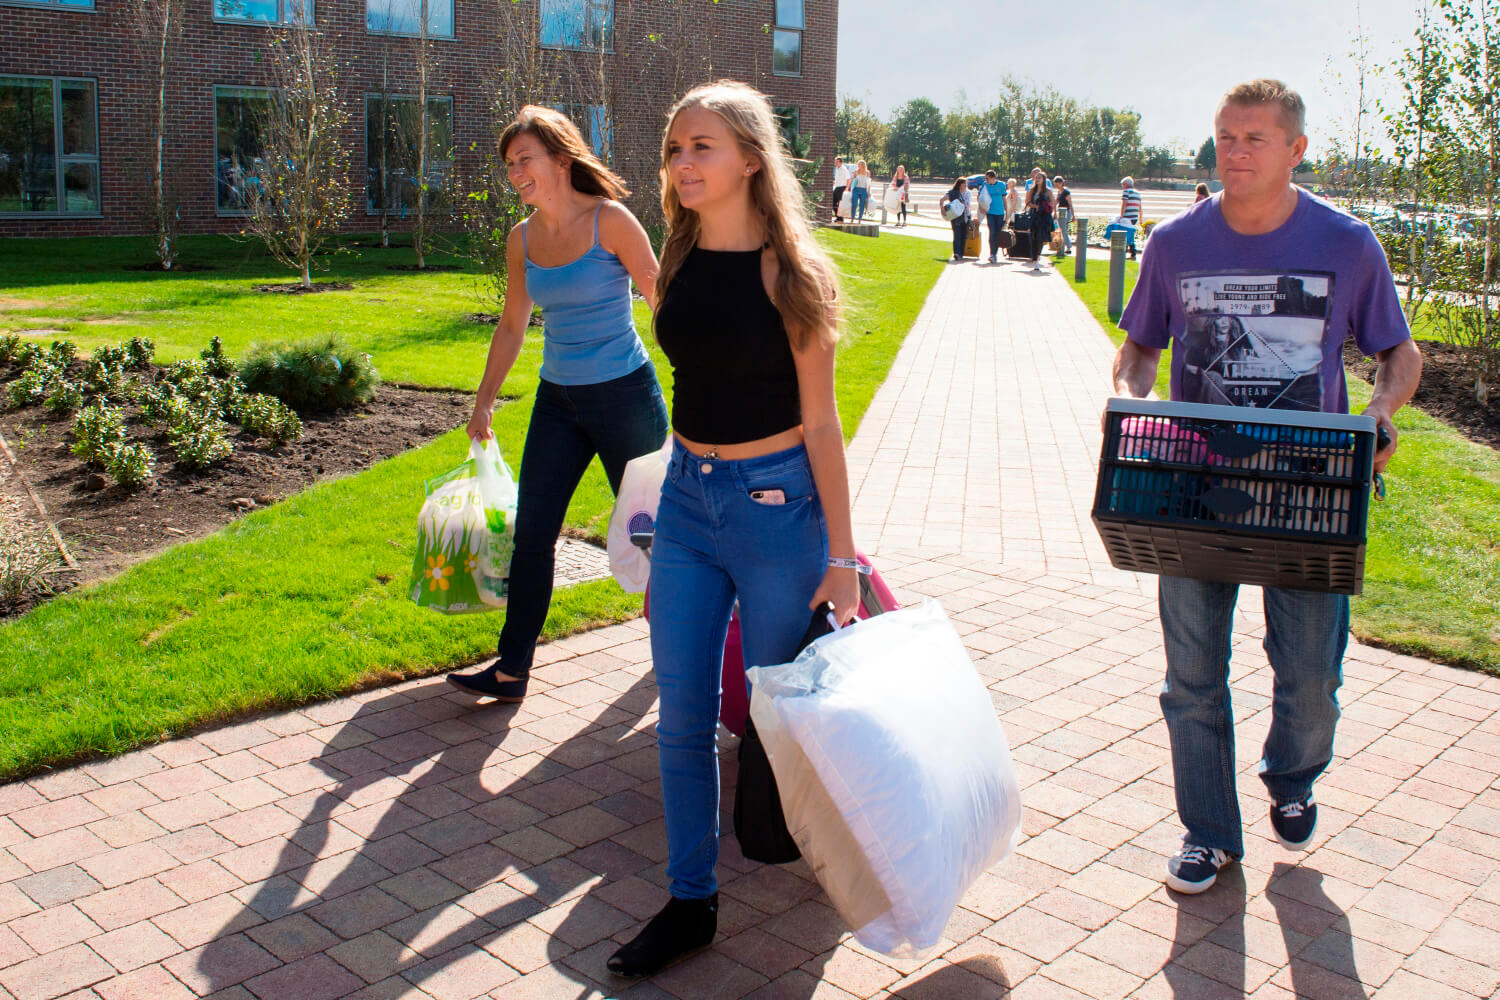 A student and her parents carry crates and bags as she prepares to move into her room on campus.